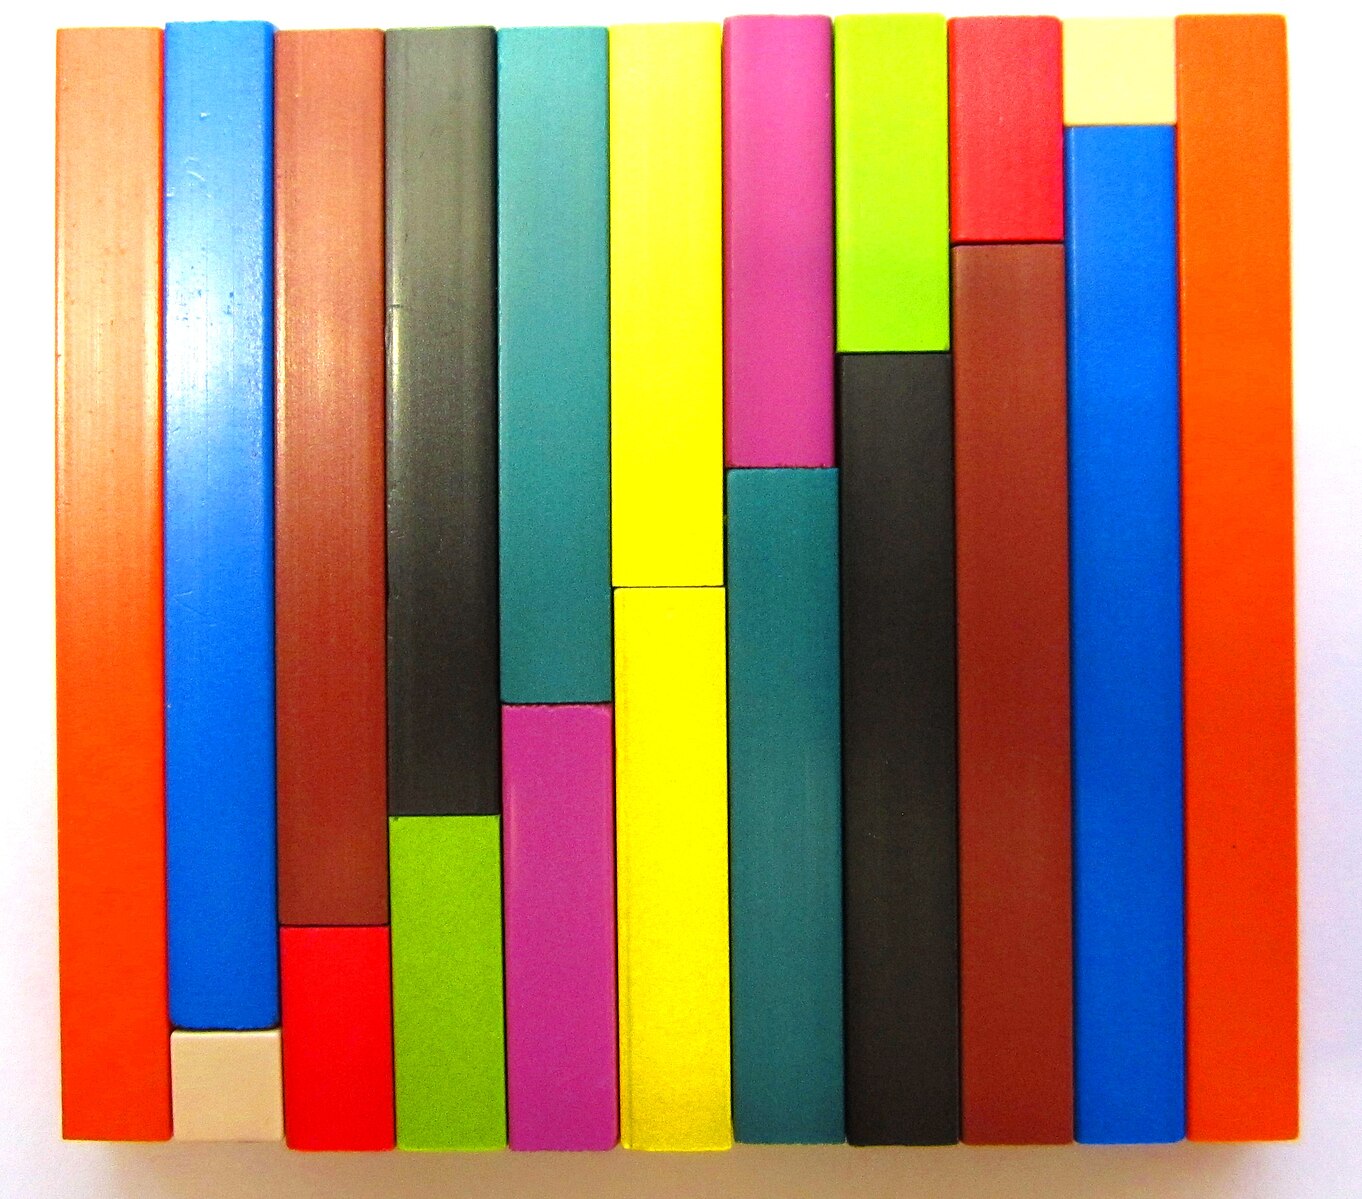 The Cuisenaire rods in a staircase arrangement.